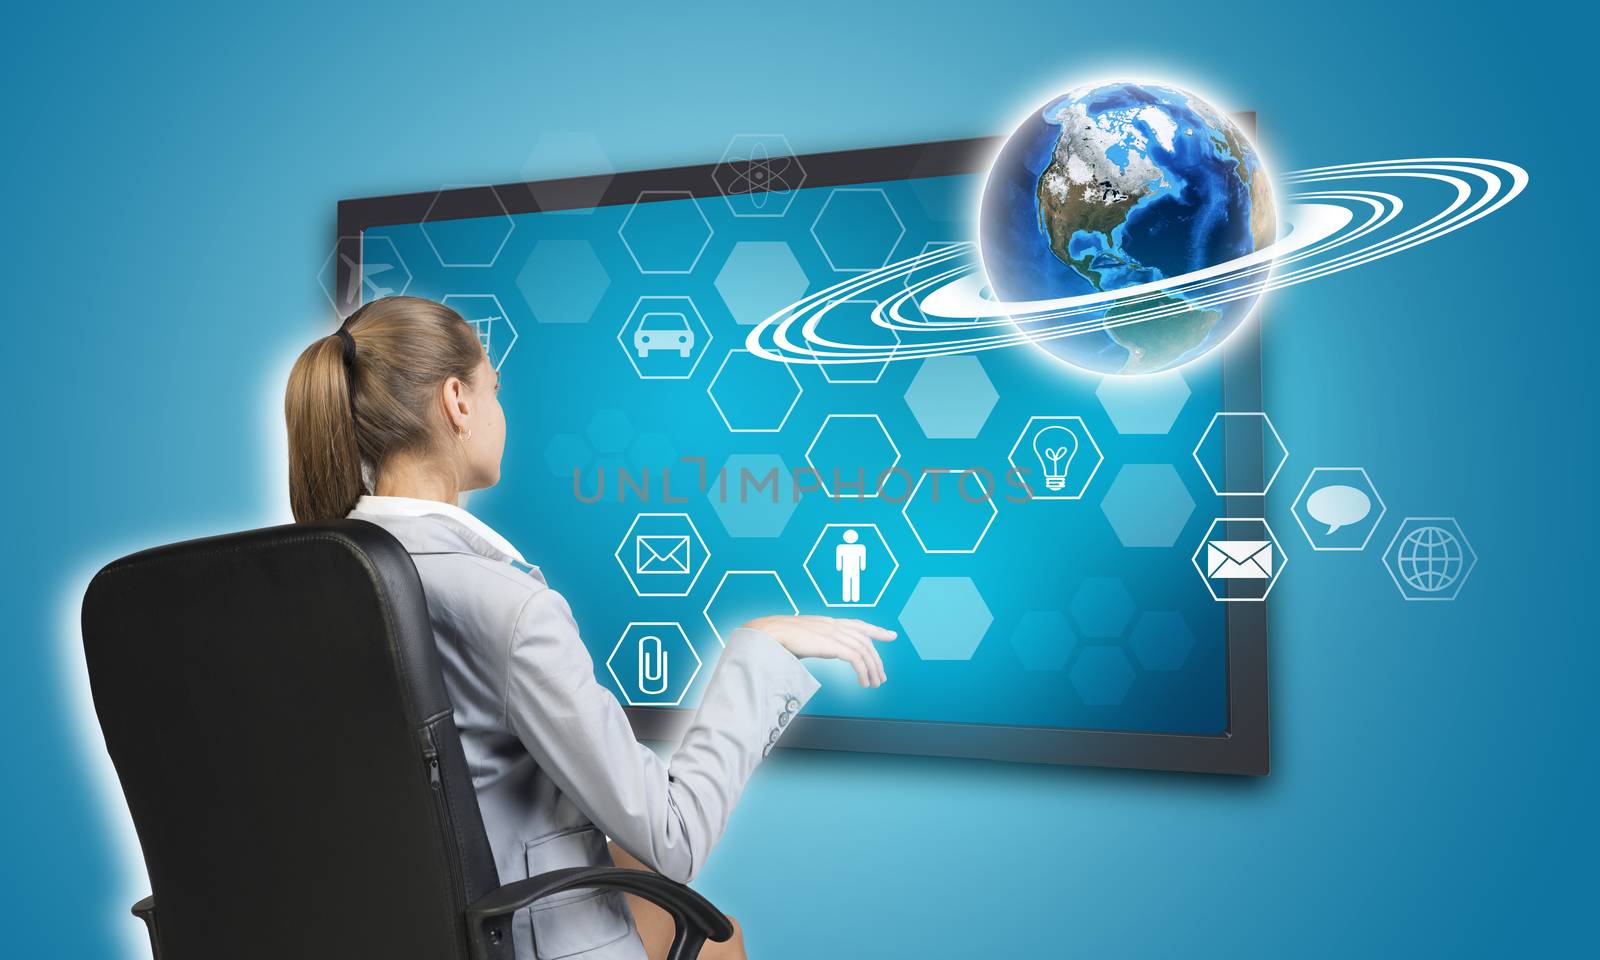 Businesswoman pressing touch screen button on virtual interface with Globe and hexagons with icons, on blue background. Element of this image furnished by NASA